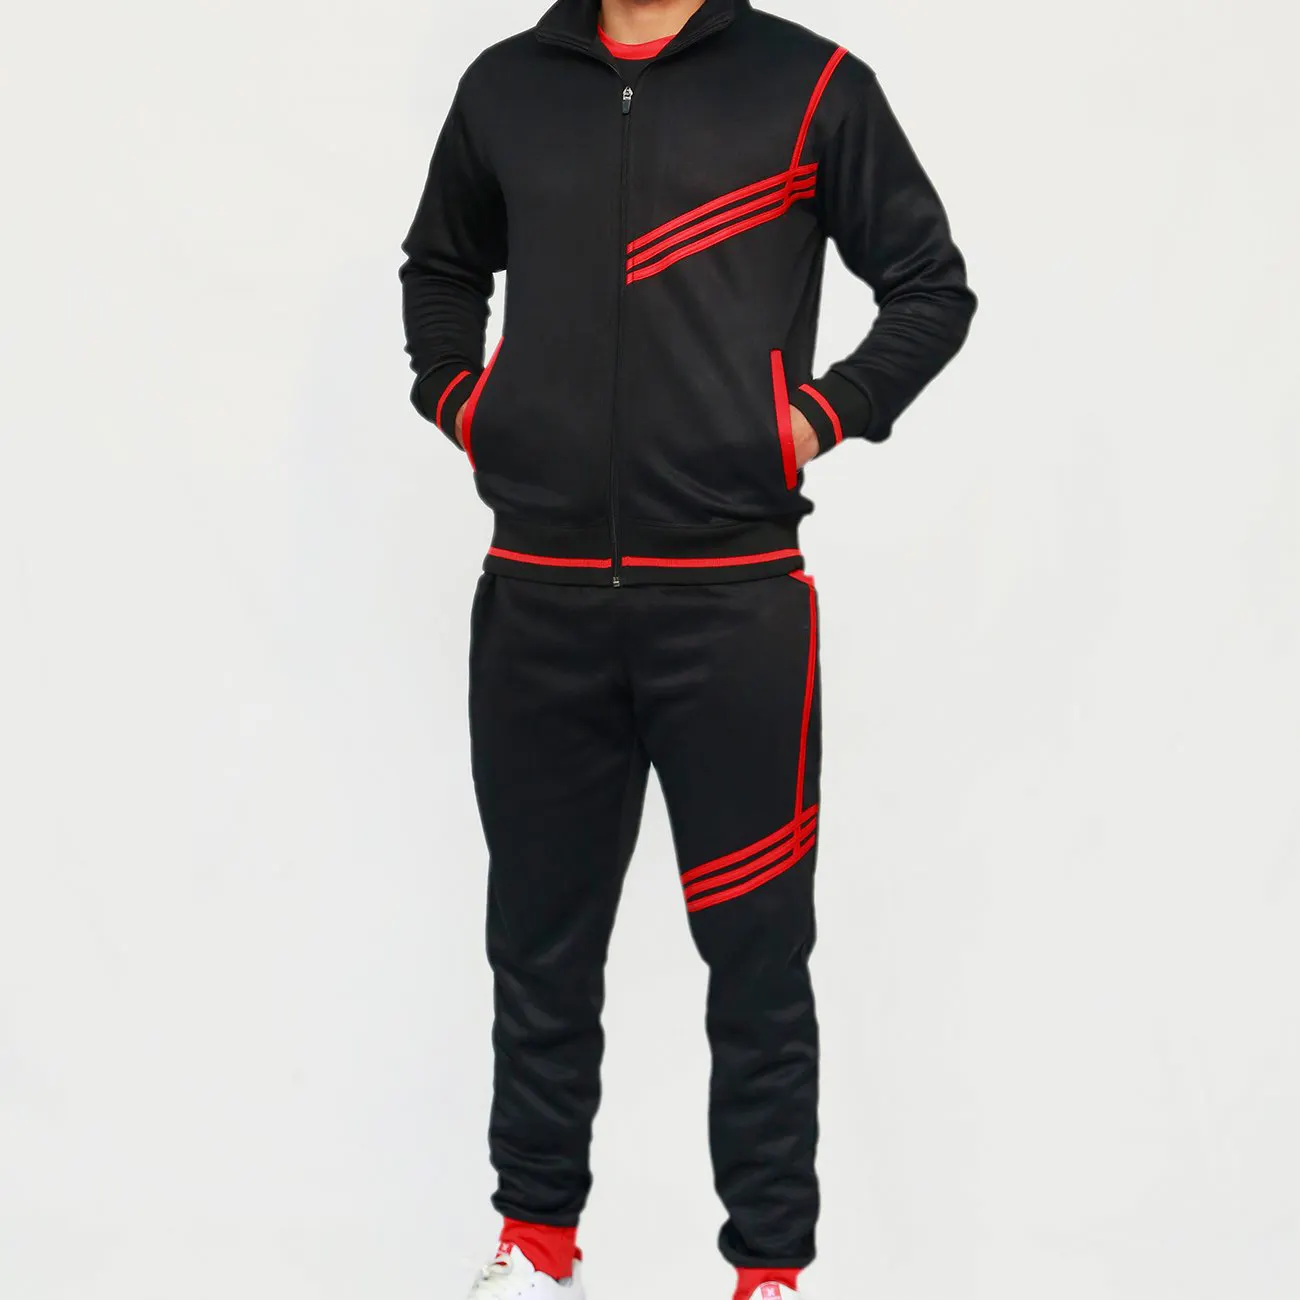 Buy all the Preferred Men's Tracksuits Get them delivered right at your doorstep hurdle and difficulty. Make your life simpler